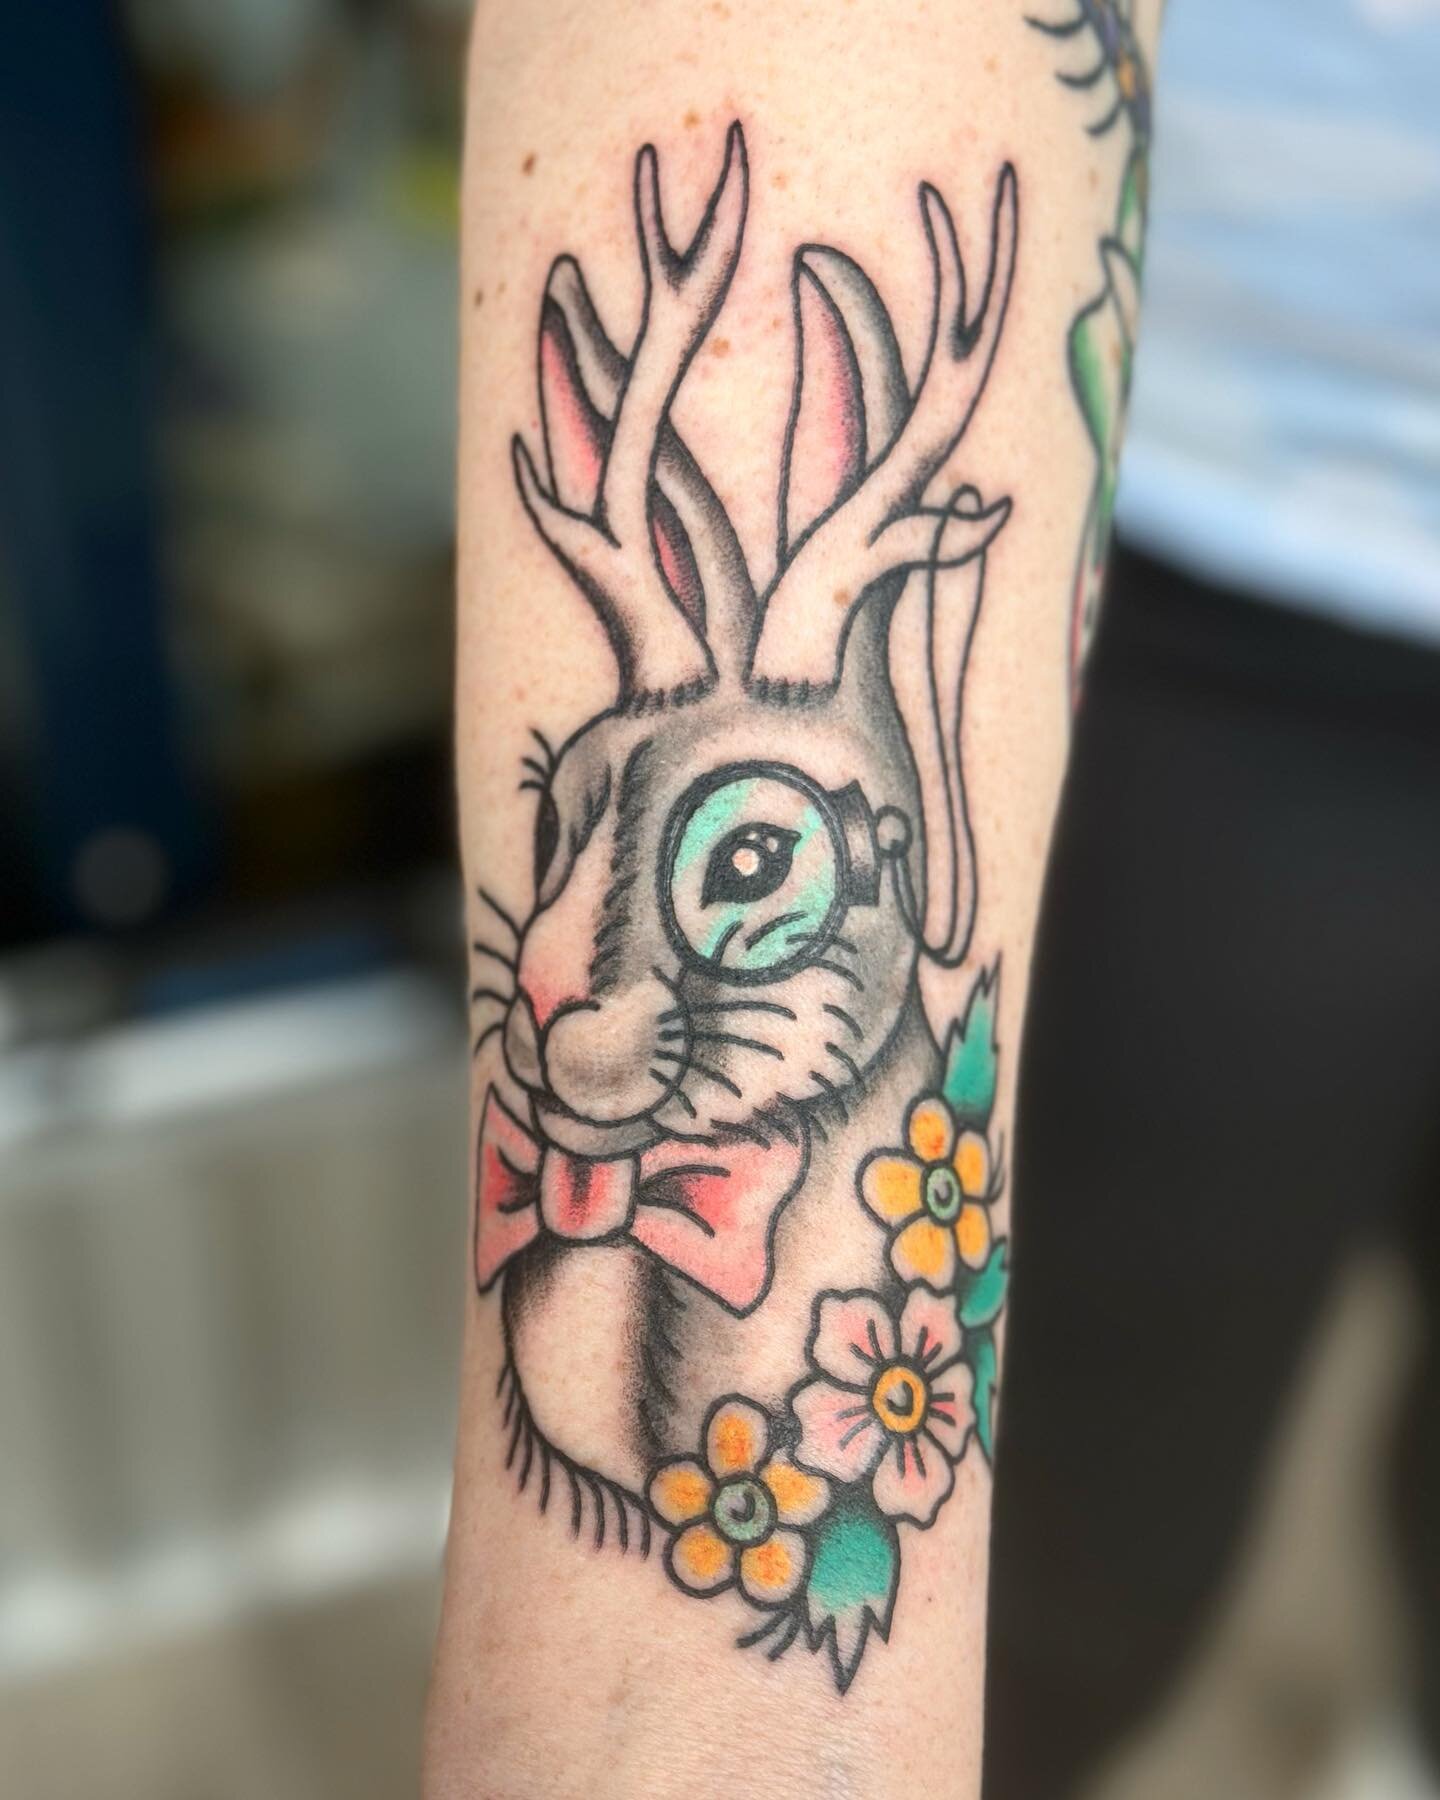 One fresh jackalope and one healed strawberry-riding frog for Eliza. One for each of her small humans. 😎 #traditionaltattoo #animaltattoo #jackalopetattoo #frogtattoo #colortattoo #trnbtattooists #queertattooartist #bostontattooartist